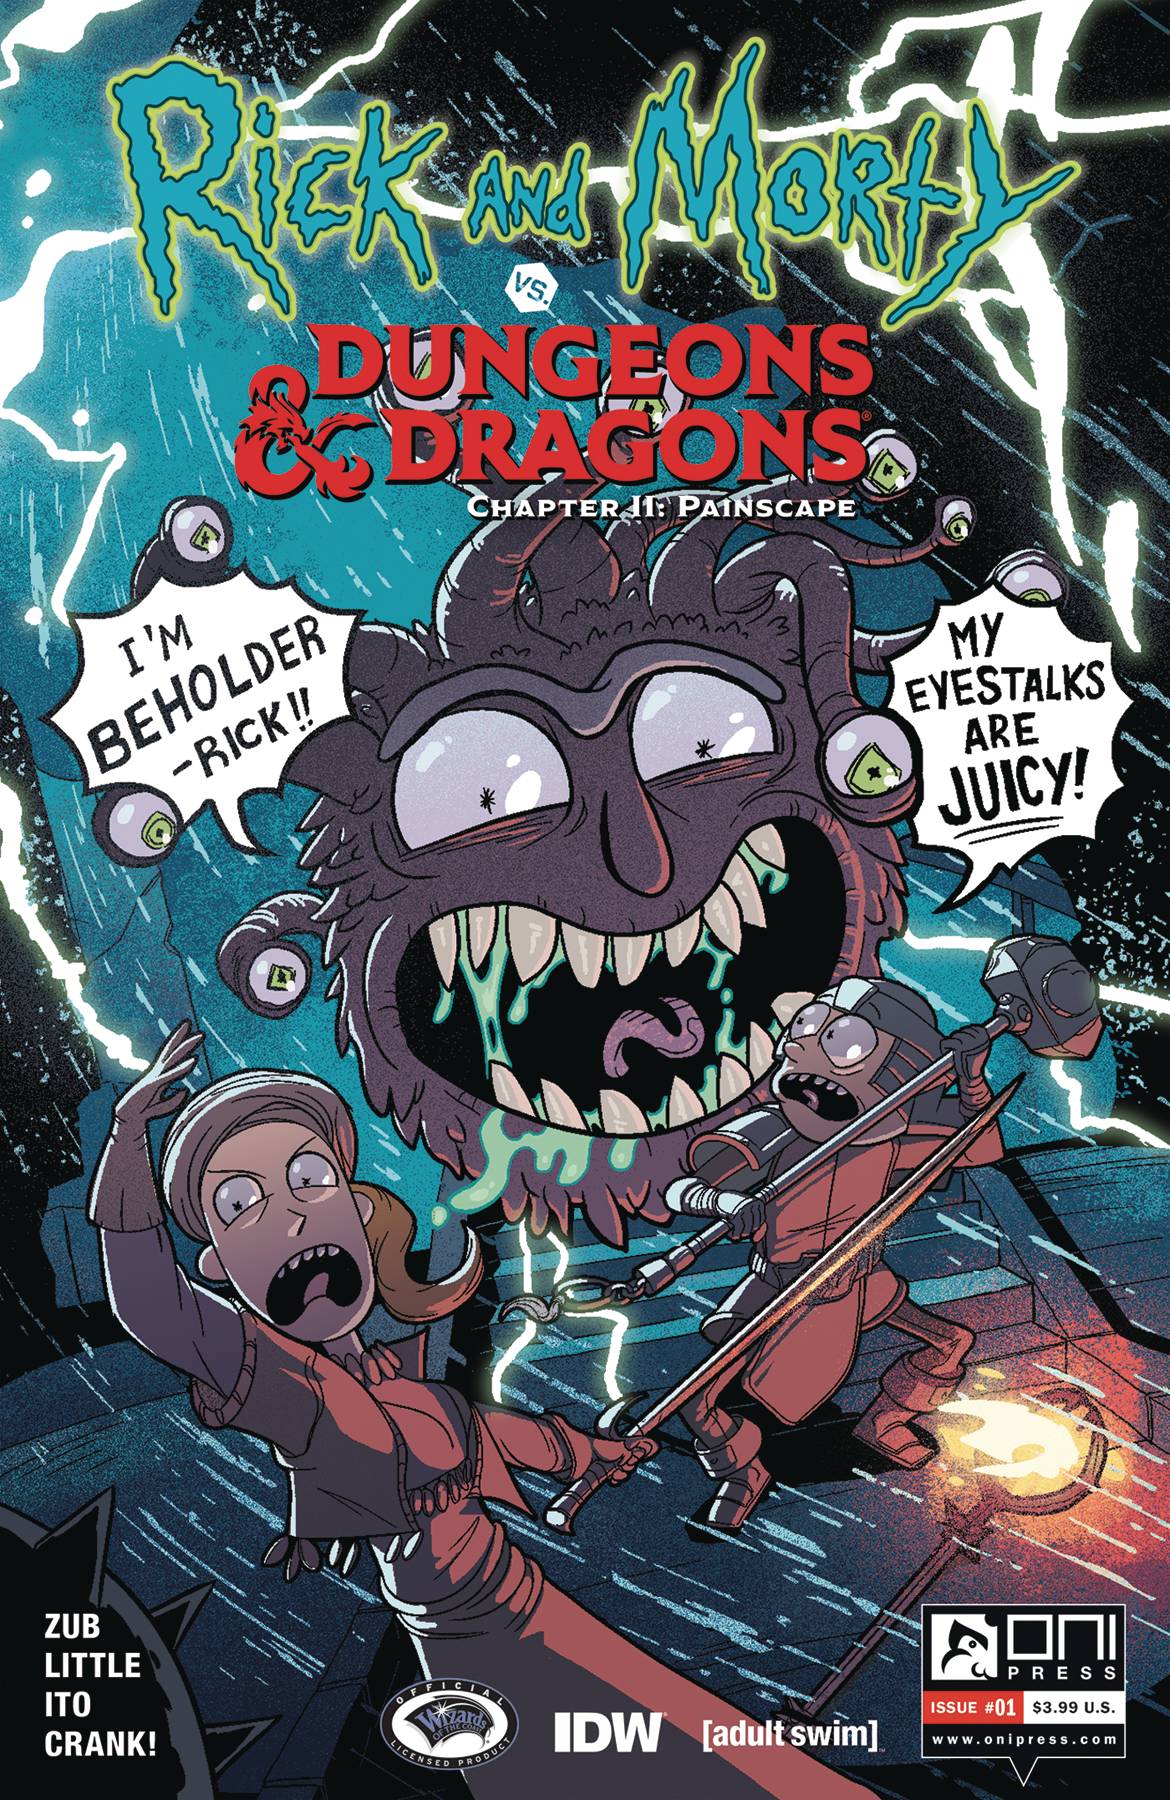 Rick and Morty Vs Dungeons & Dragons II Painscape #1 Cover B Zub (Mature)